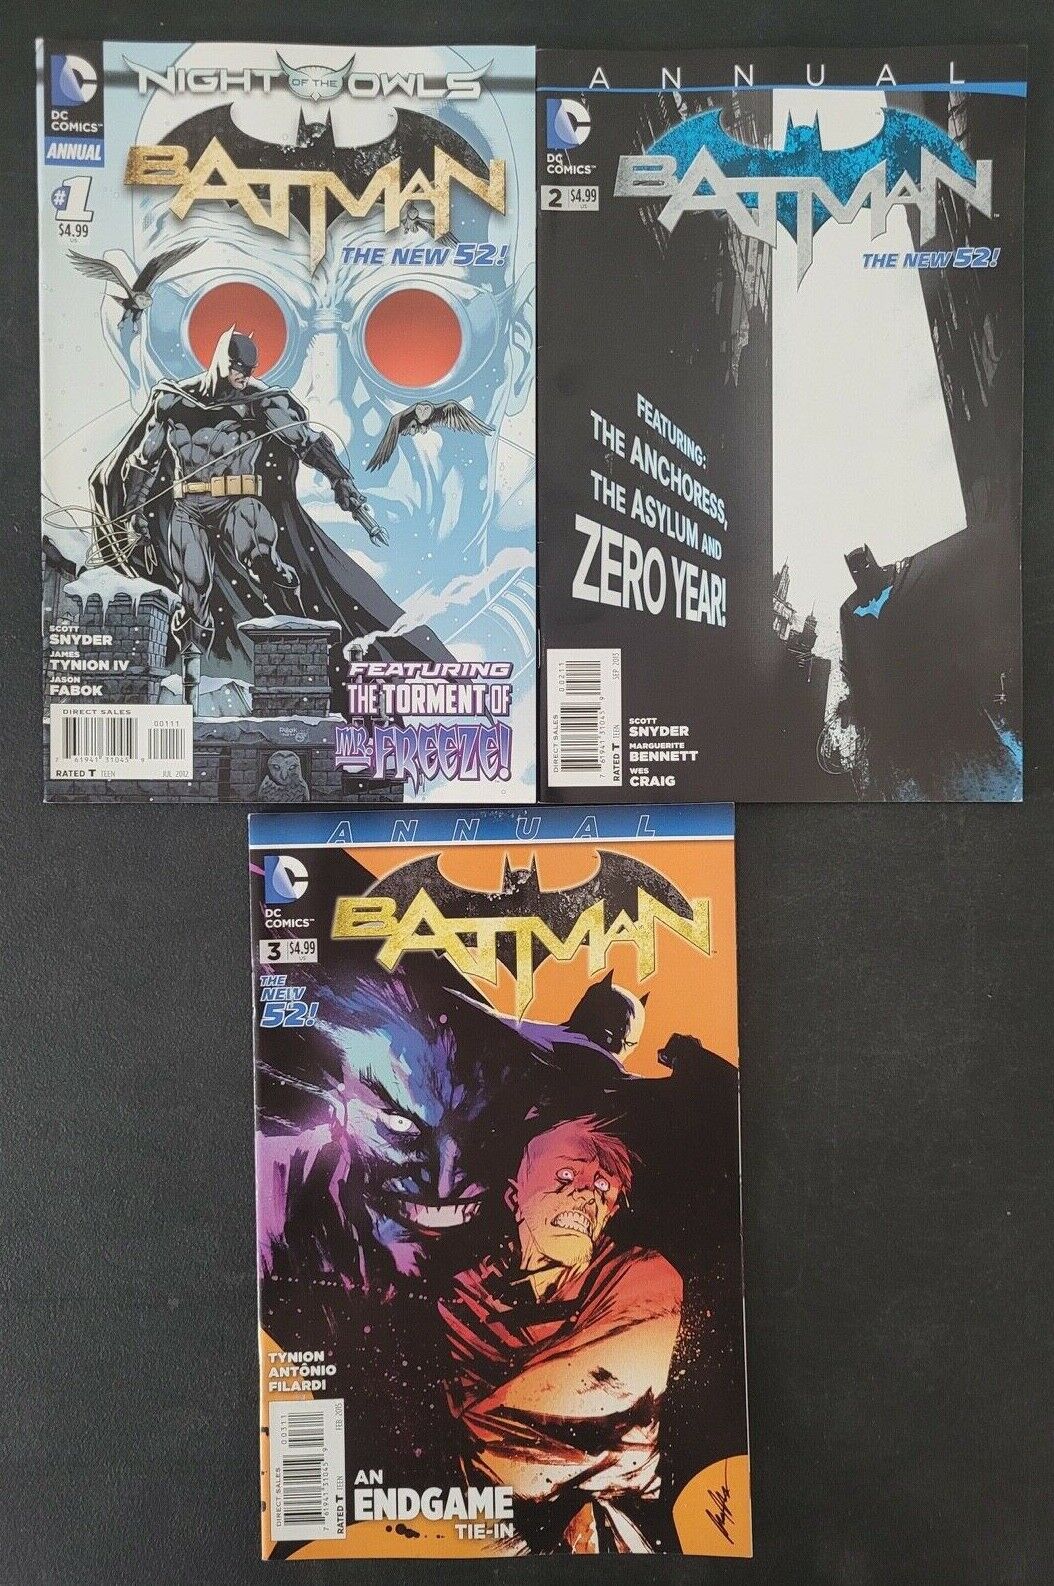 BATMAN ANNUAL #1 2 3 (2014) DC 52 COMICS DOUBLE-SIZED NIGHT OF OWLS SNYDER